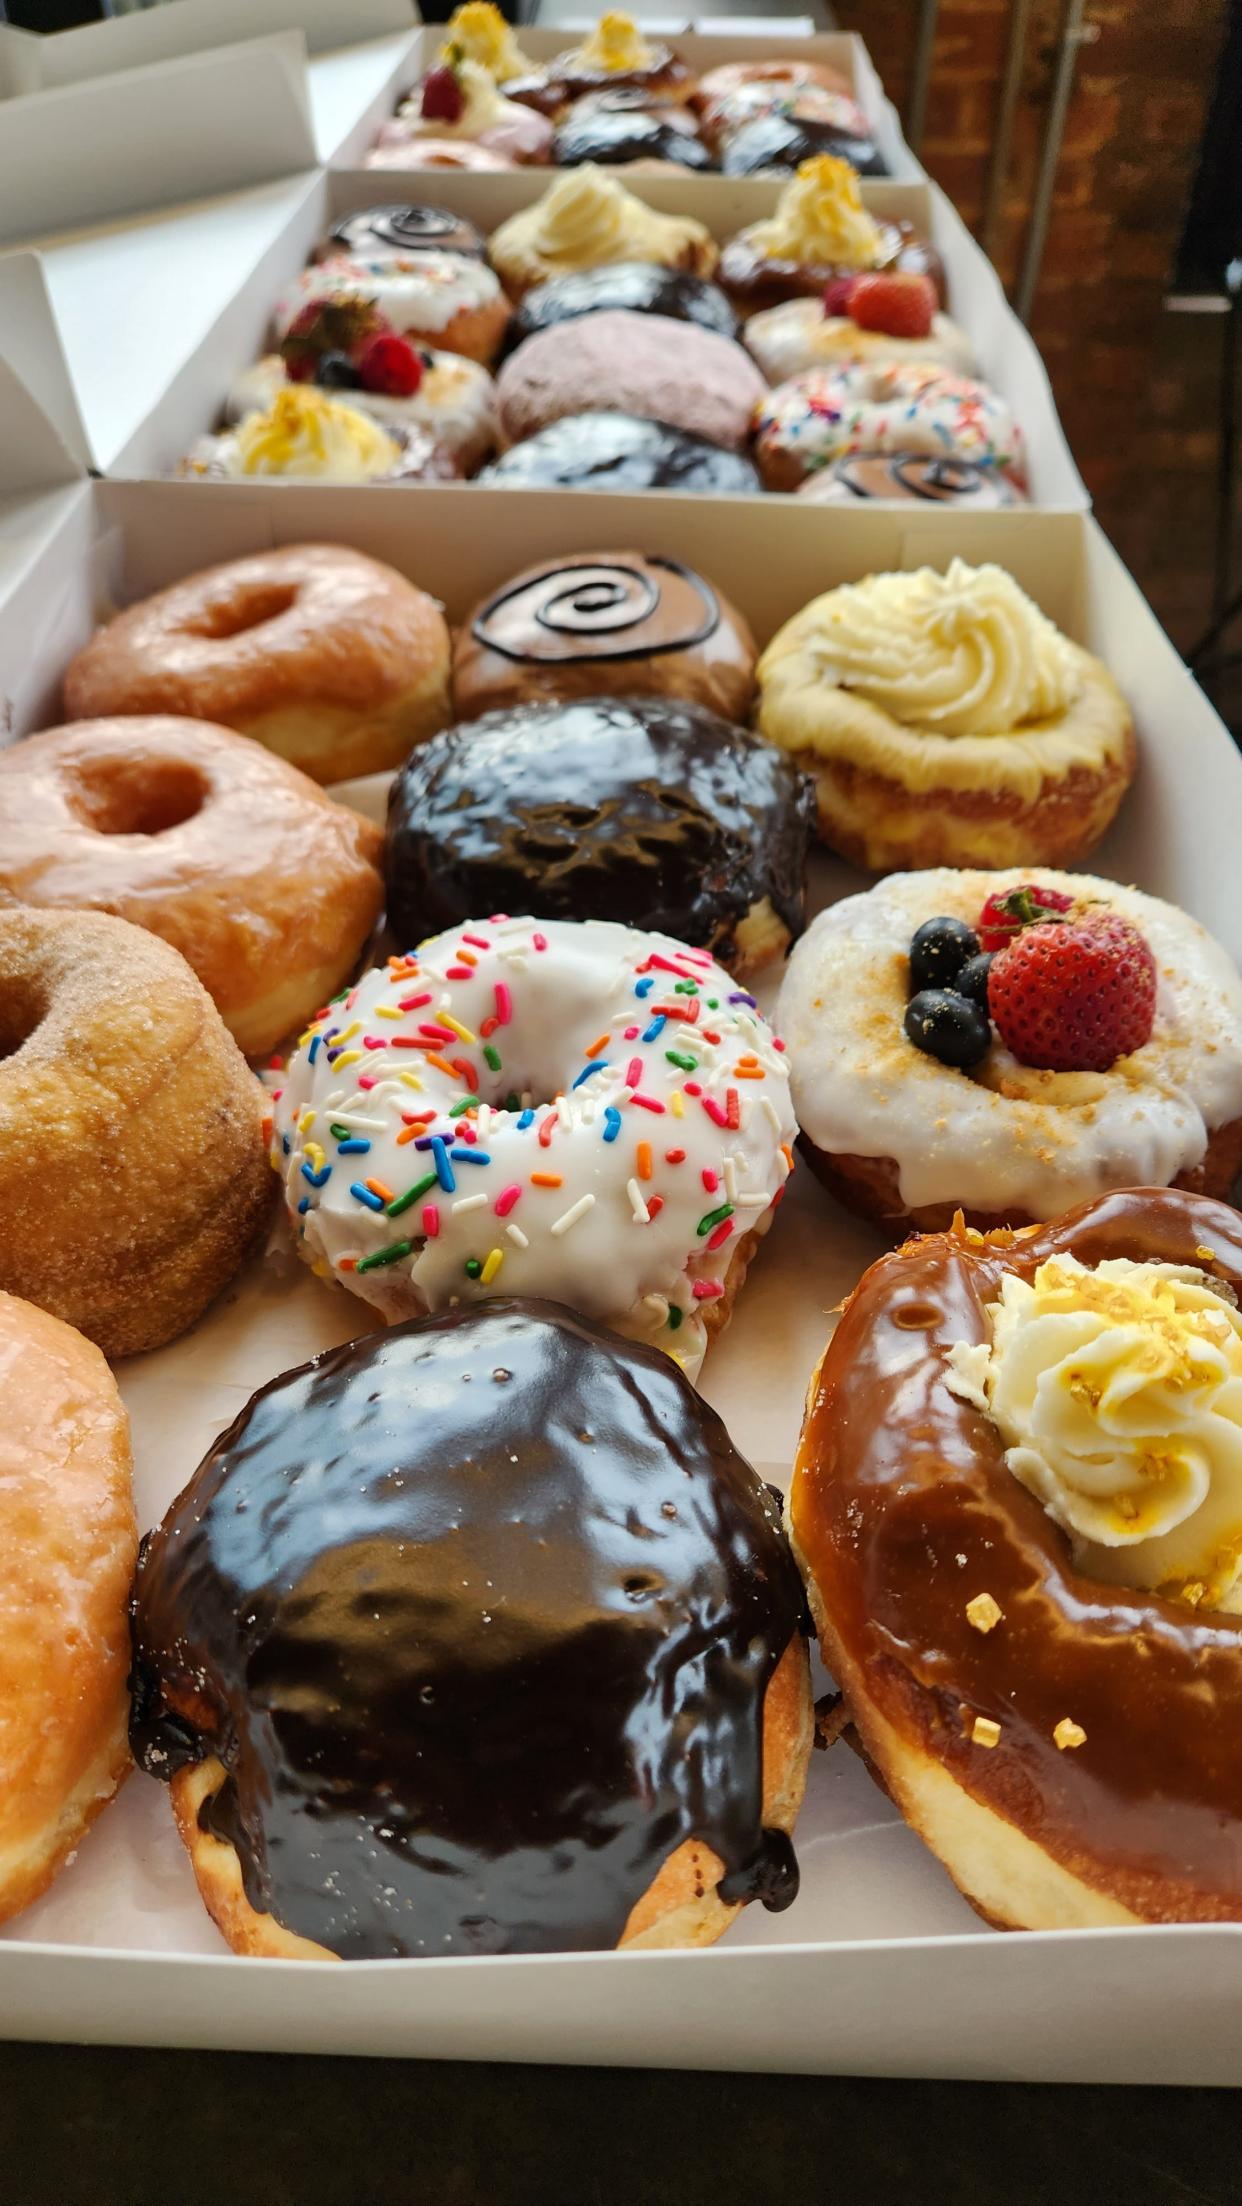 Montclair Bread Company is famous for its donuts